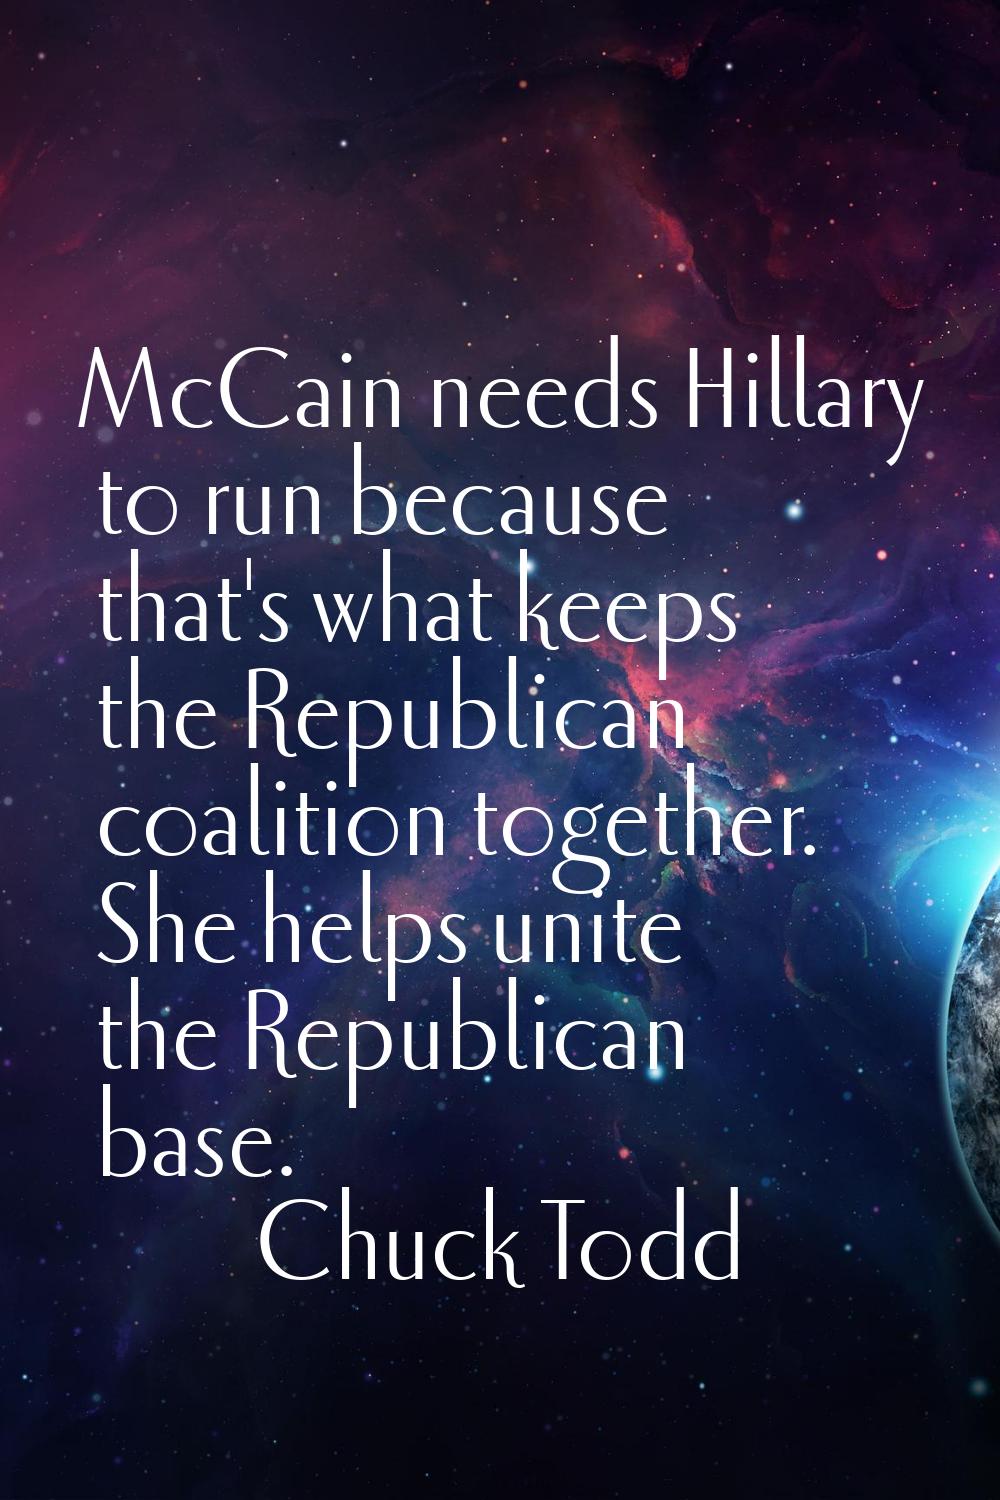 McCain needs Hillary to run because that's what keeps the Republican coalition together. She helps 